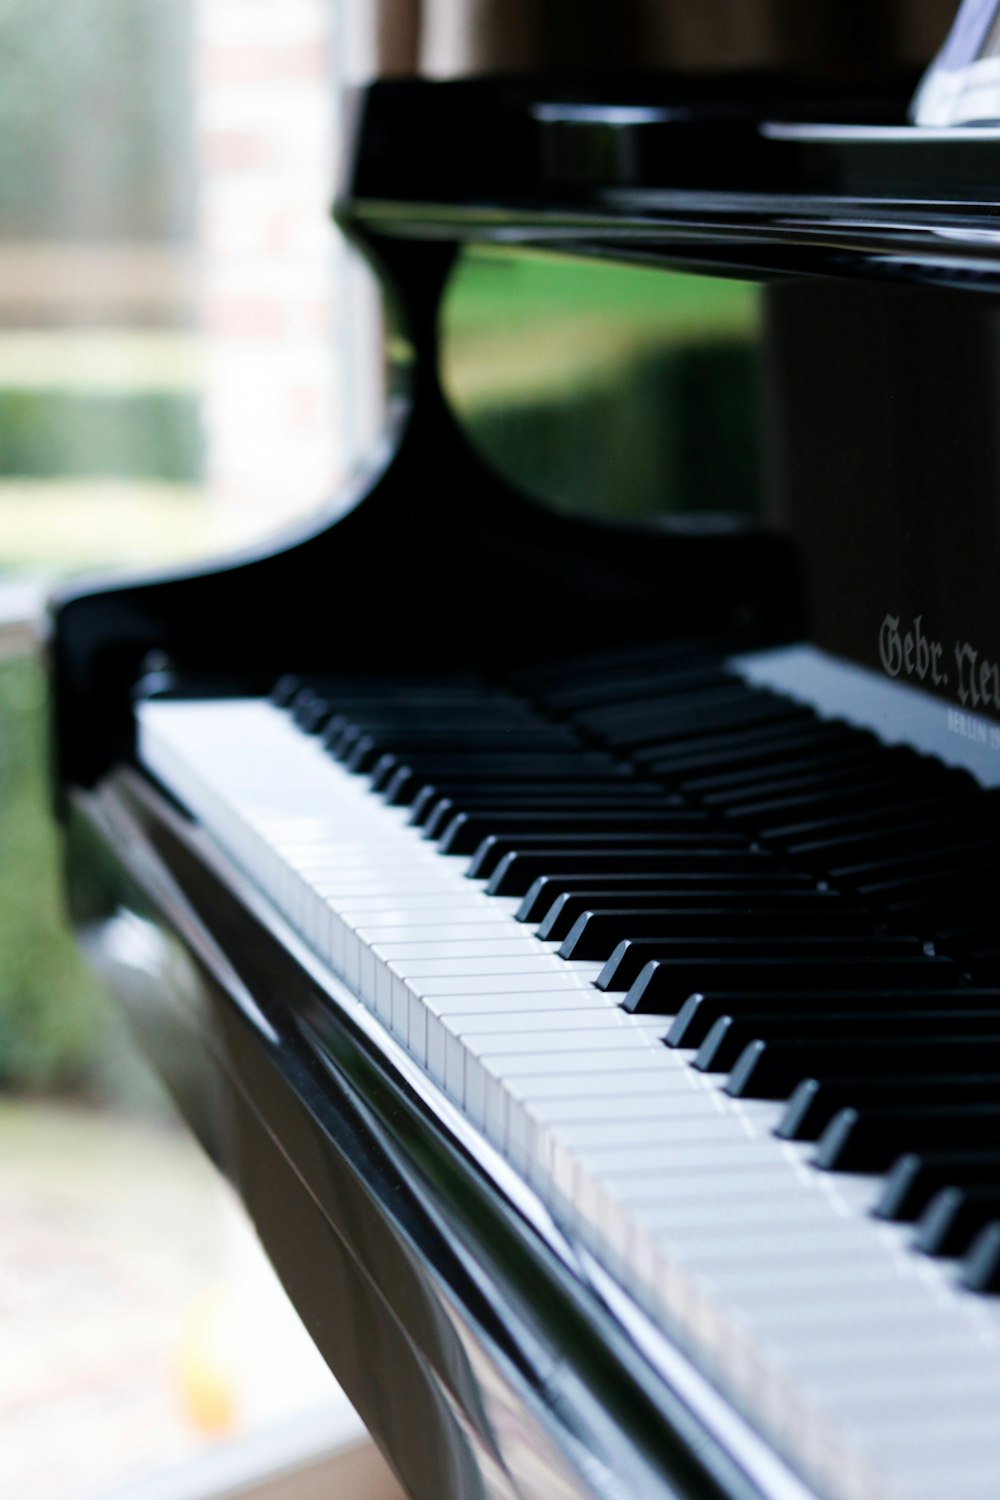 750+ The Piano Pictures [HD] | Download Free Images on Unsplash